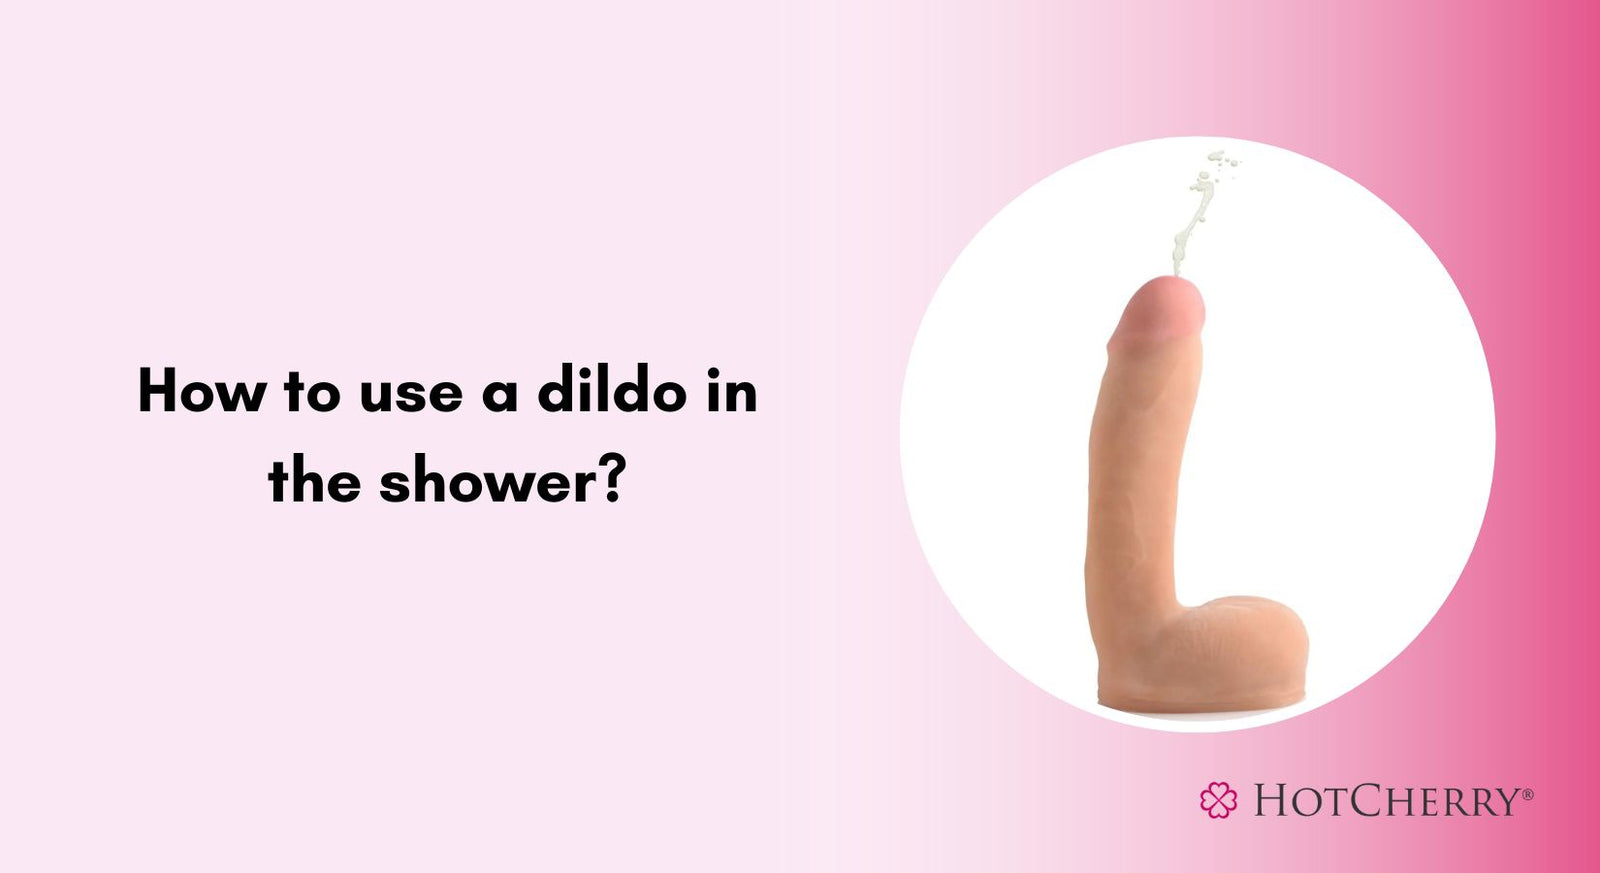 How to Use a Dildo in the Shower?